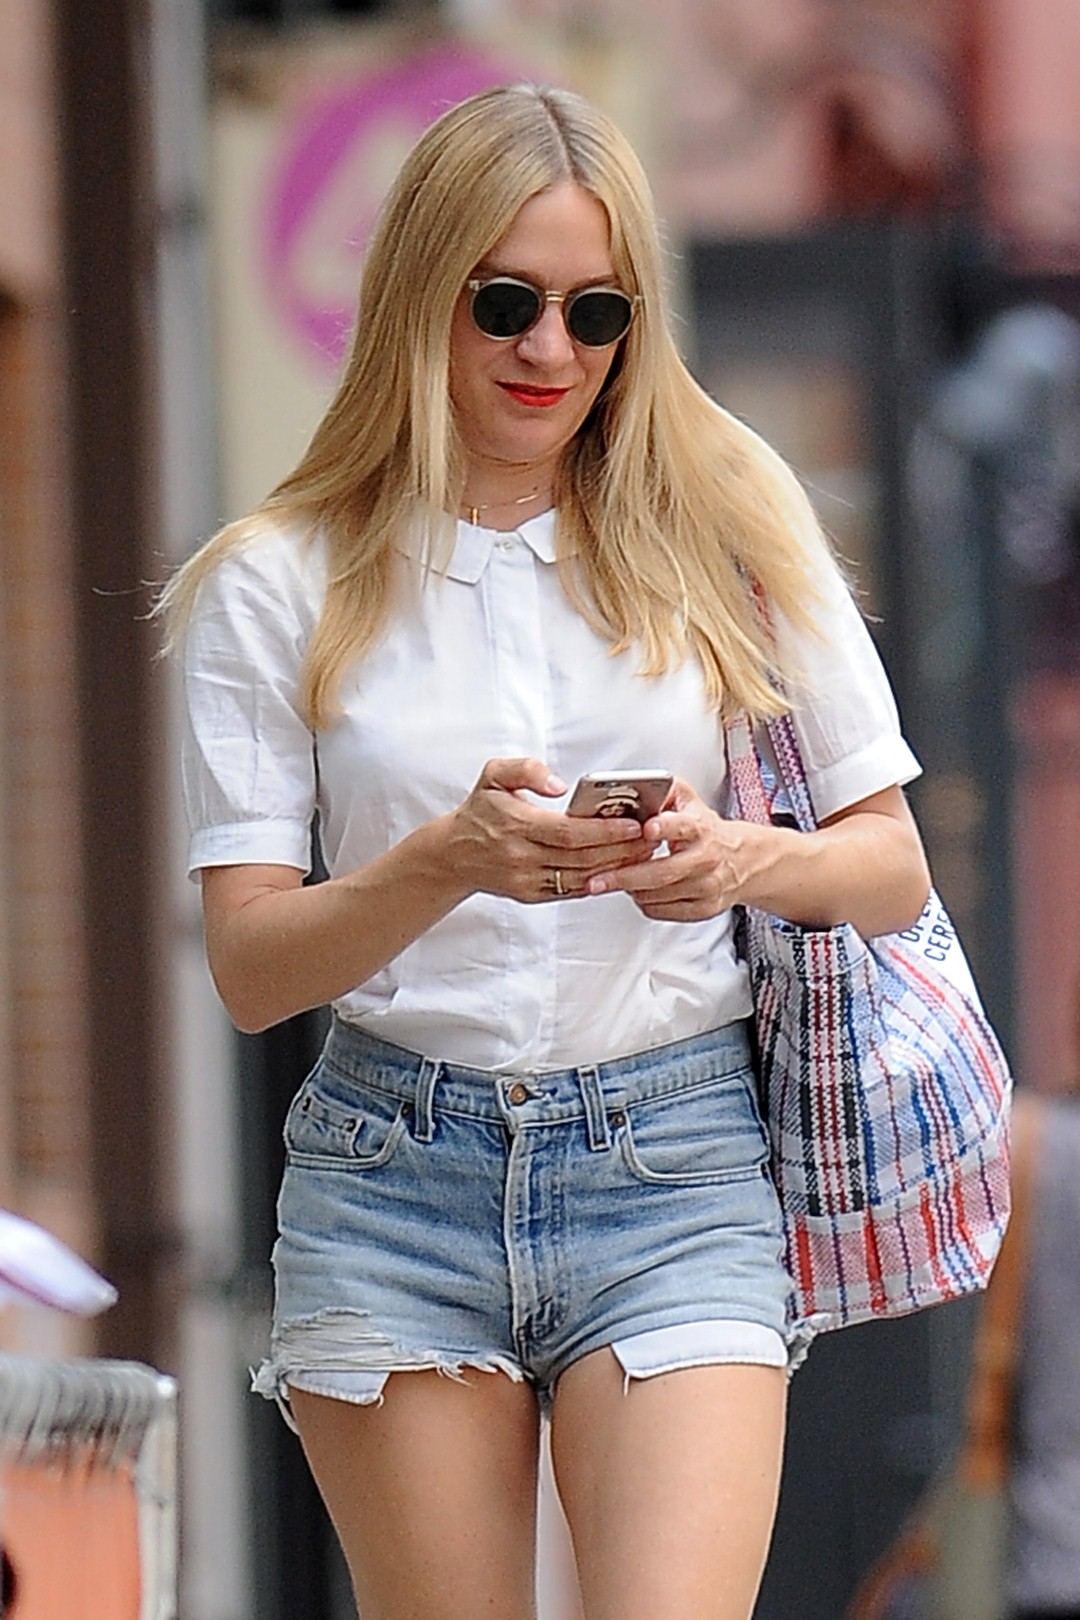 chloe-sevigny-out-amp-about-in-nyc-june-21-31-pics-1 (Large).jpg